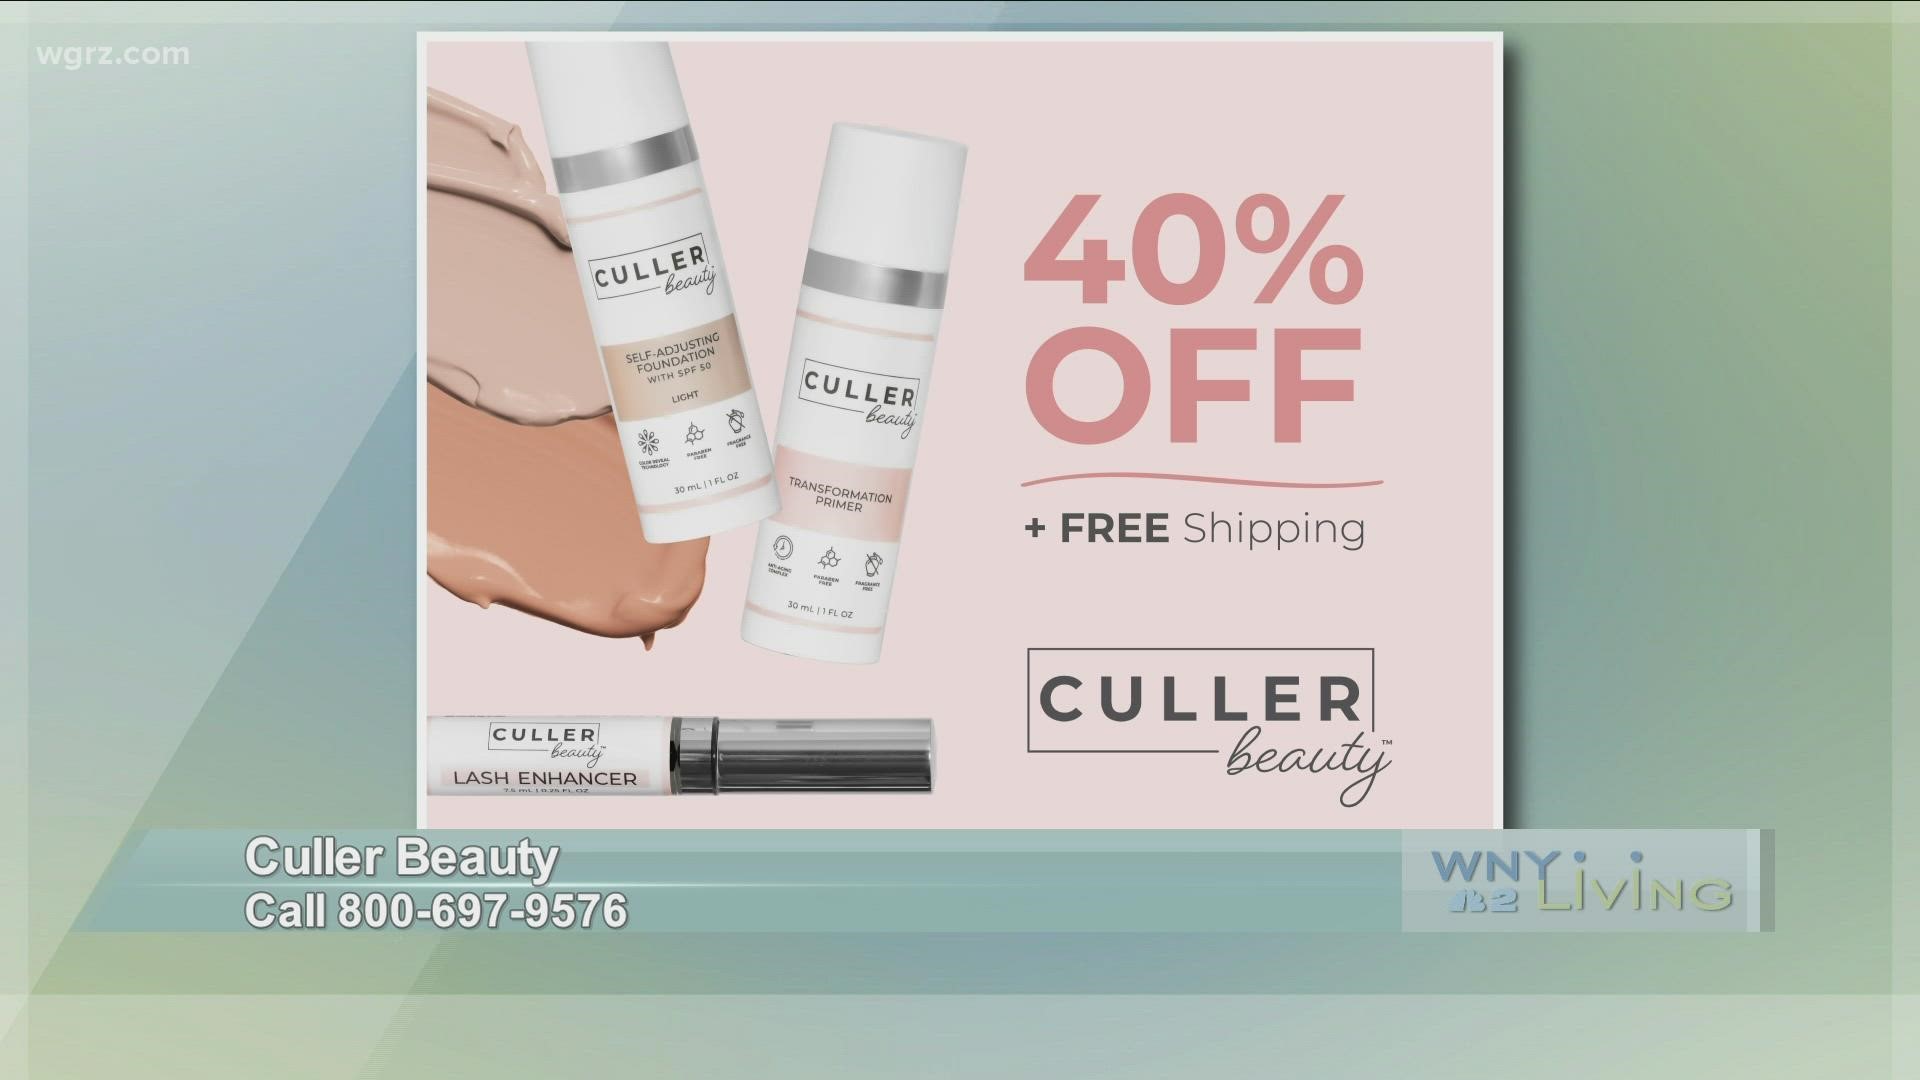 WNY Living - November 20 - Culler Beauty (THIS VIDEO IS SPONSORED BY CULLER BEAUTY)